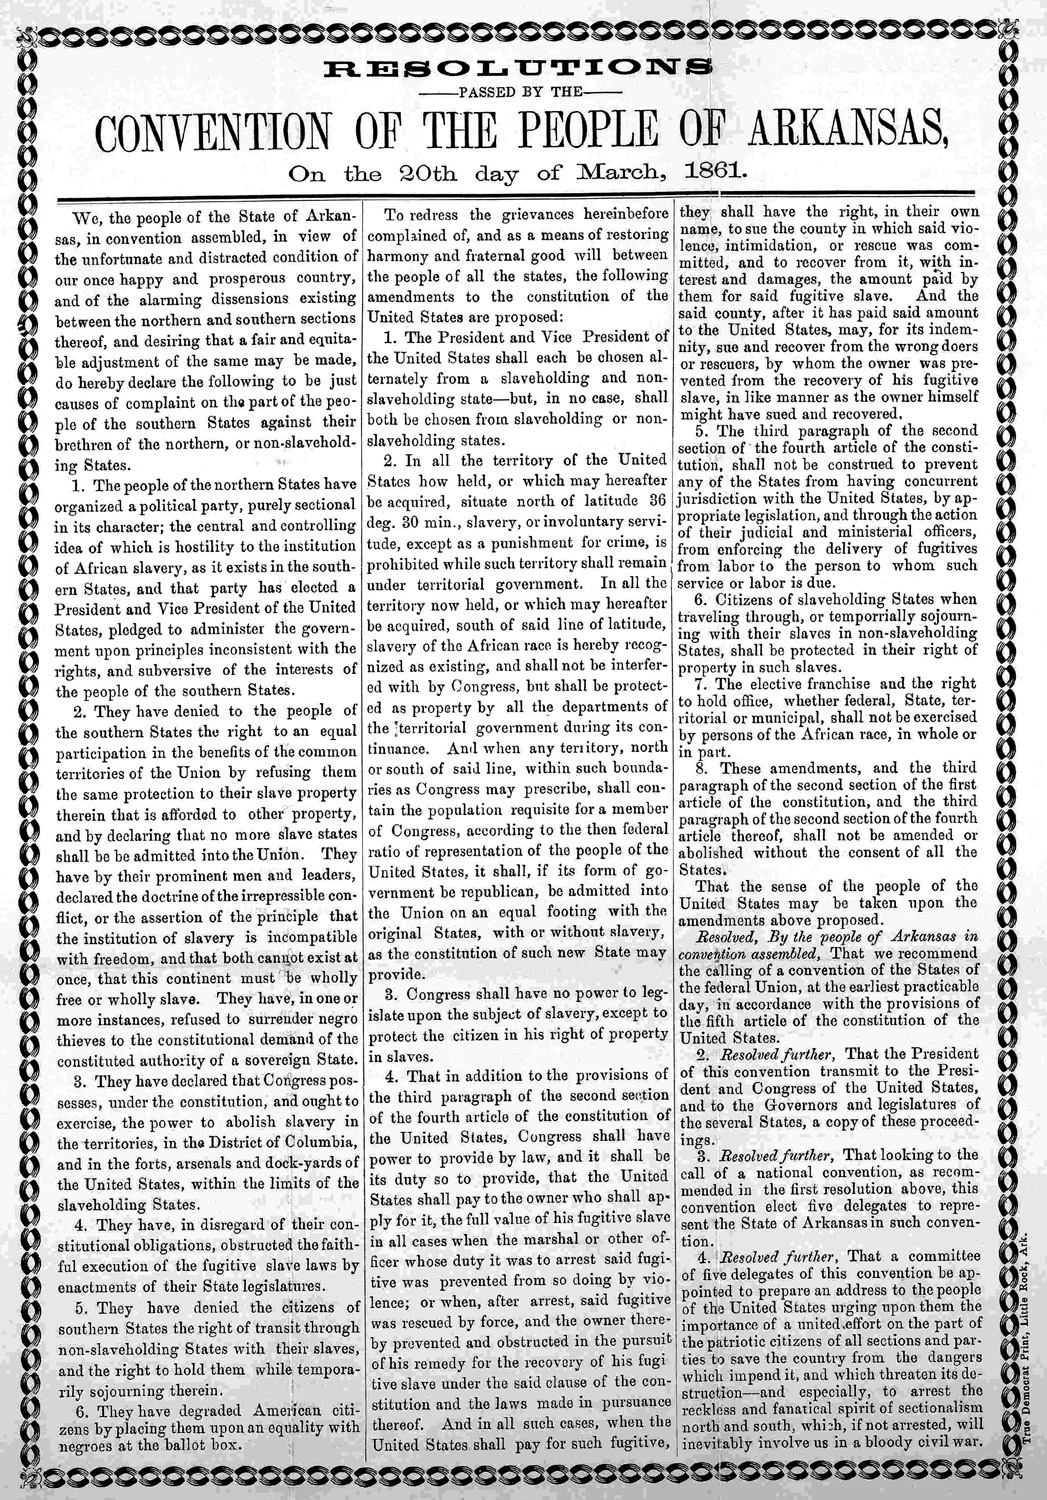 "Resolutions passed by the convention of the people of Arkansas on the twentieth day of March 1861" document in three columns with border art